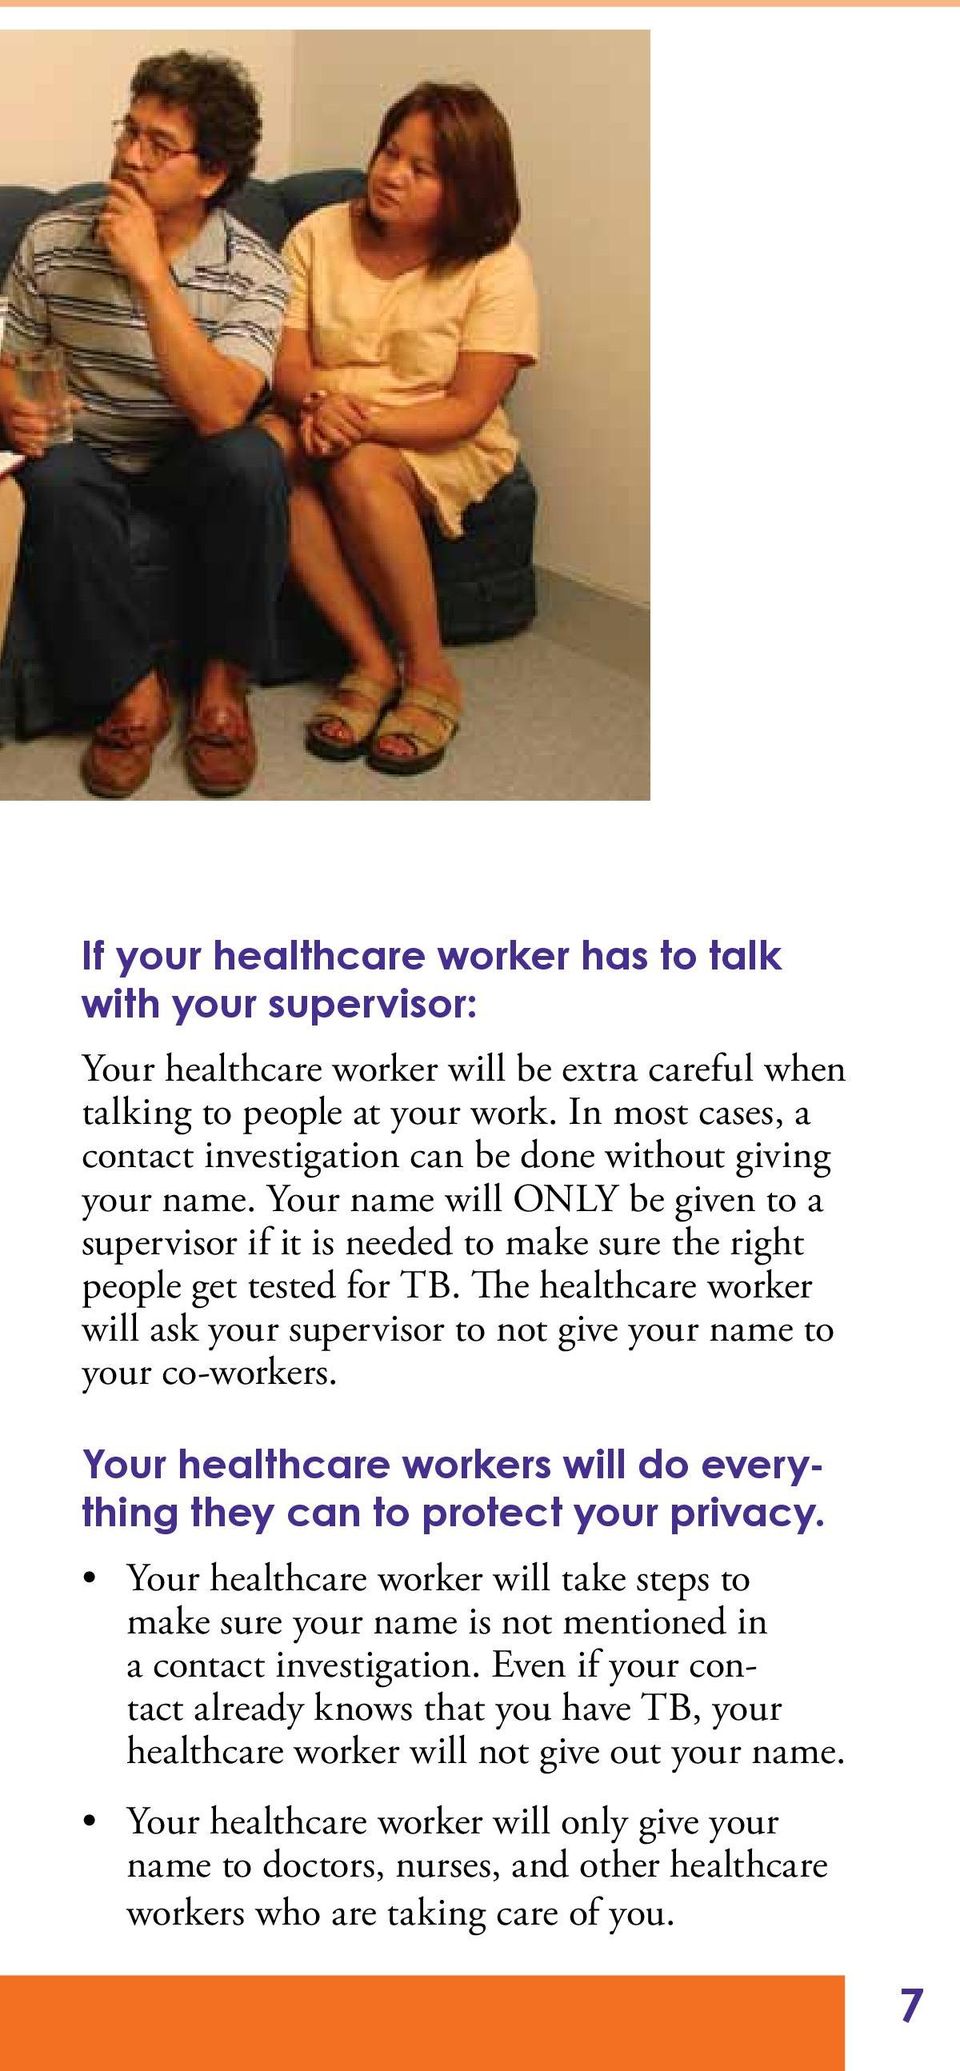 The healthcare worker will ask your supervisor to not give your name to your co-workers. Your healthcare workers will do everything they can to protect your privacy.